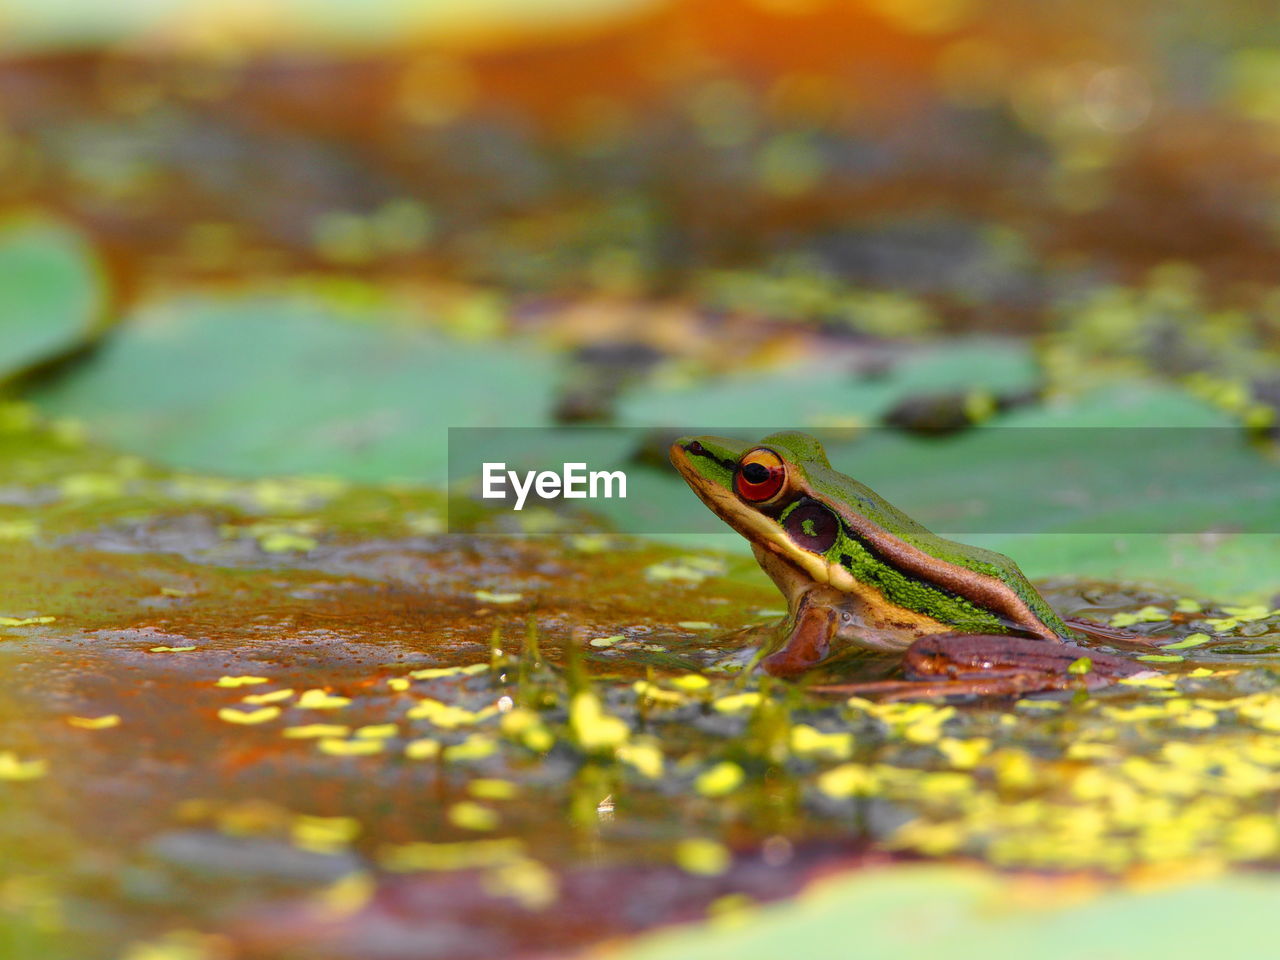 CLOSE-UP OF A FROG